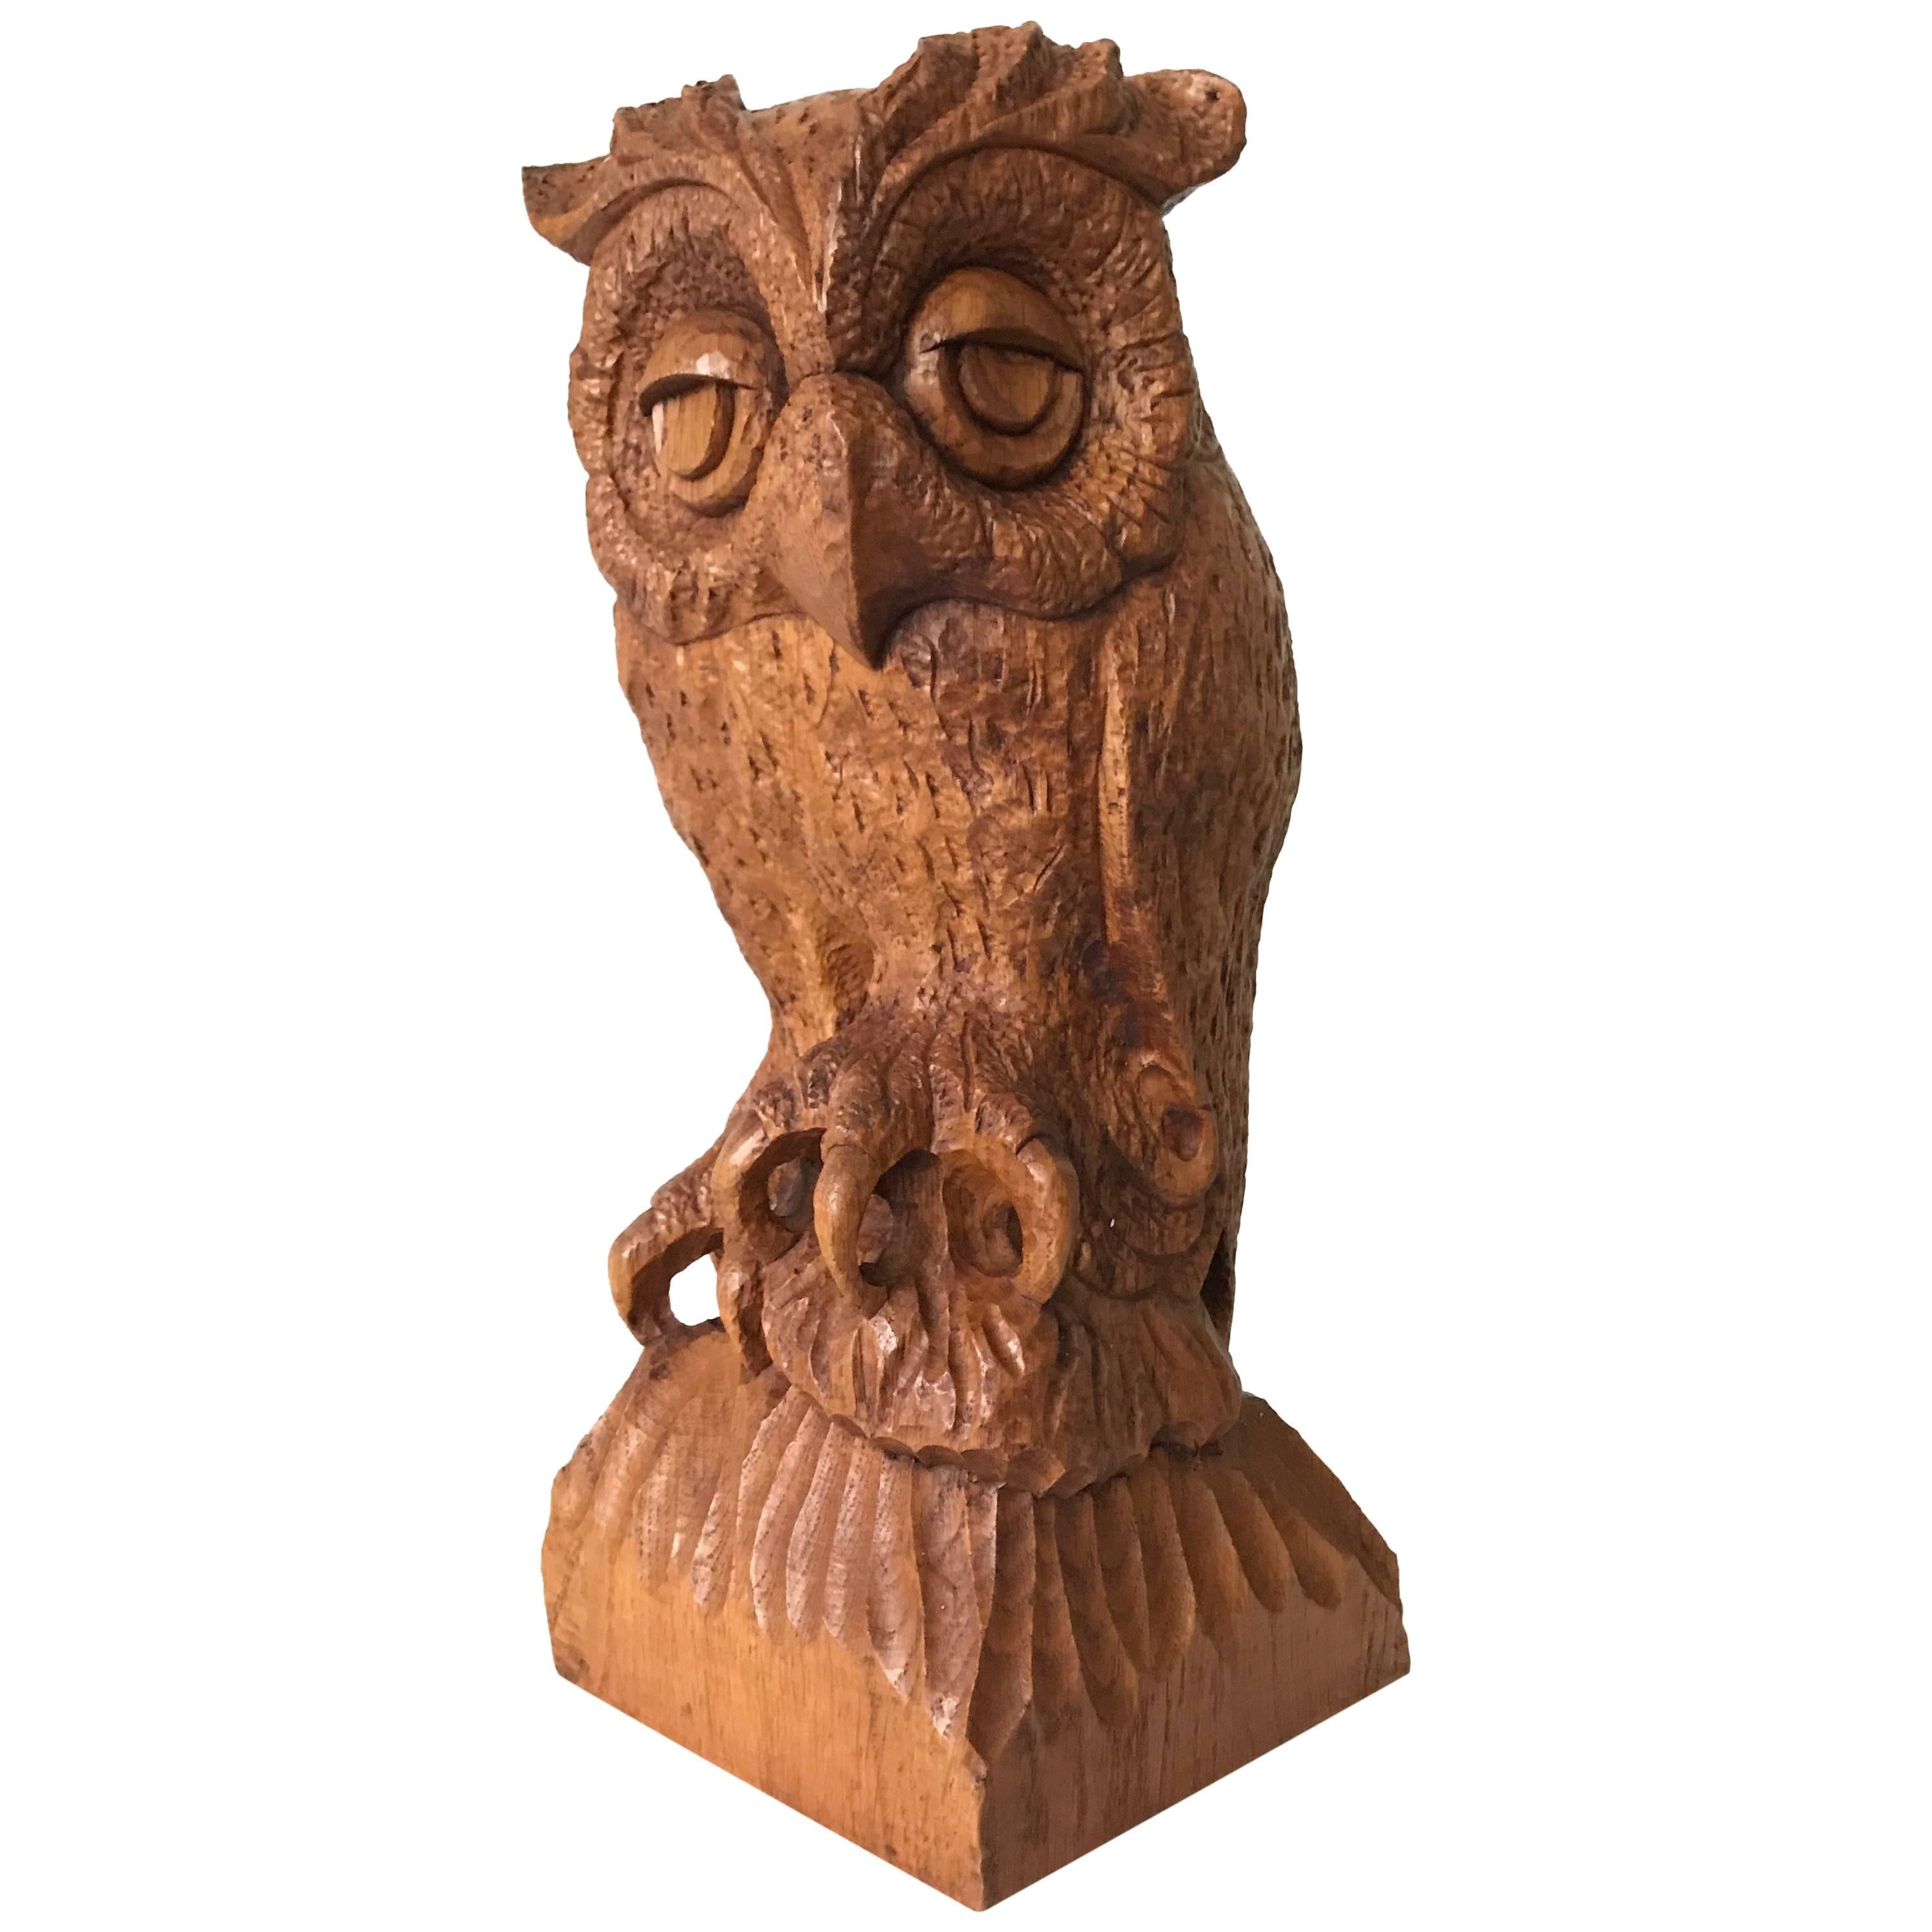 Sizable Mid-20th Century Carved Oak Owl, Rare and Symbol of Learning and Wisdom